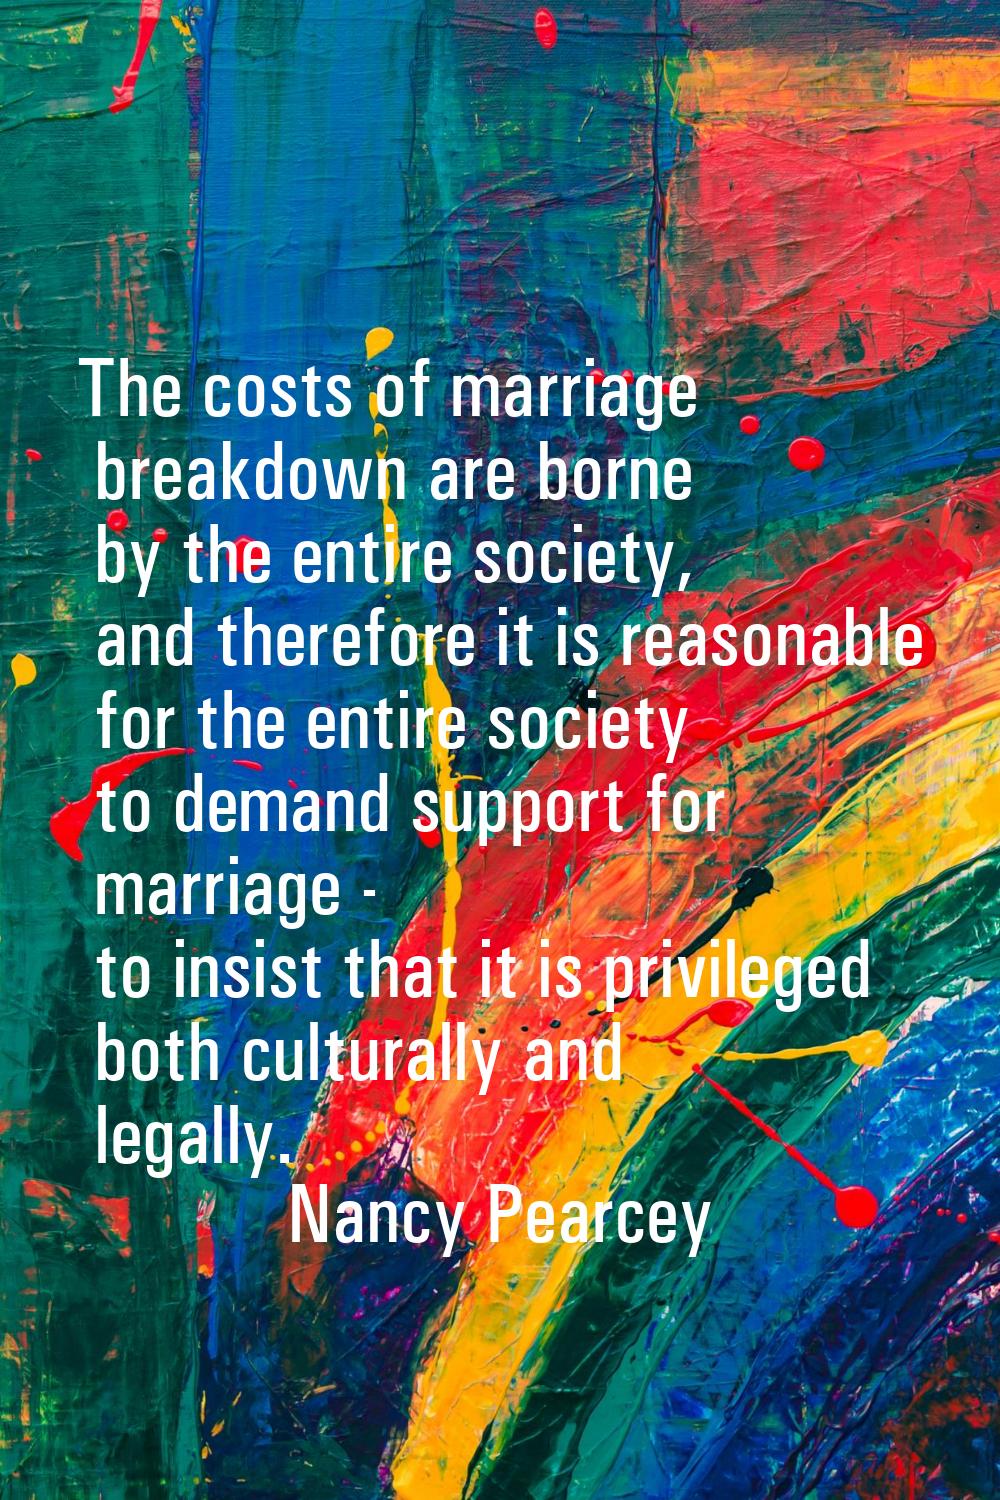 The costs of marriage breakdown are borne by the entire society, and therefore it is reasonable for